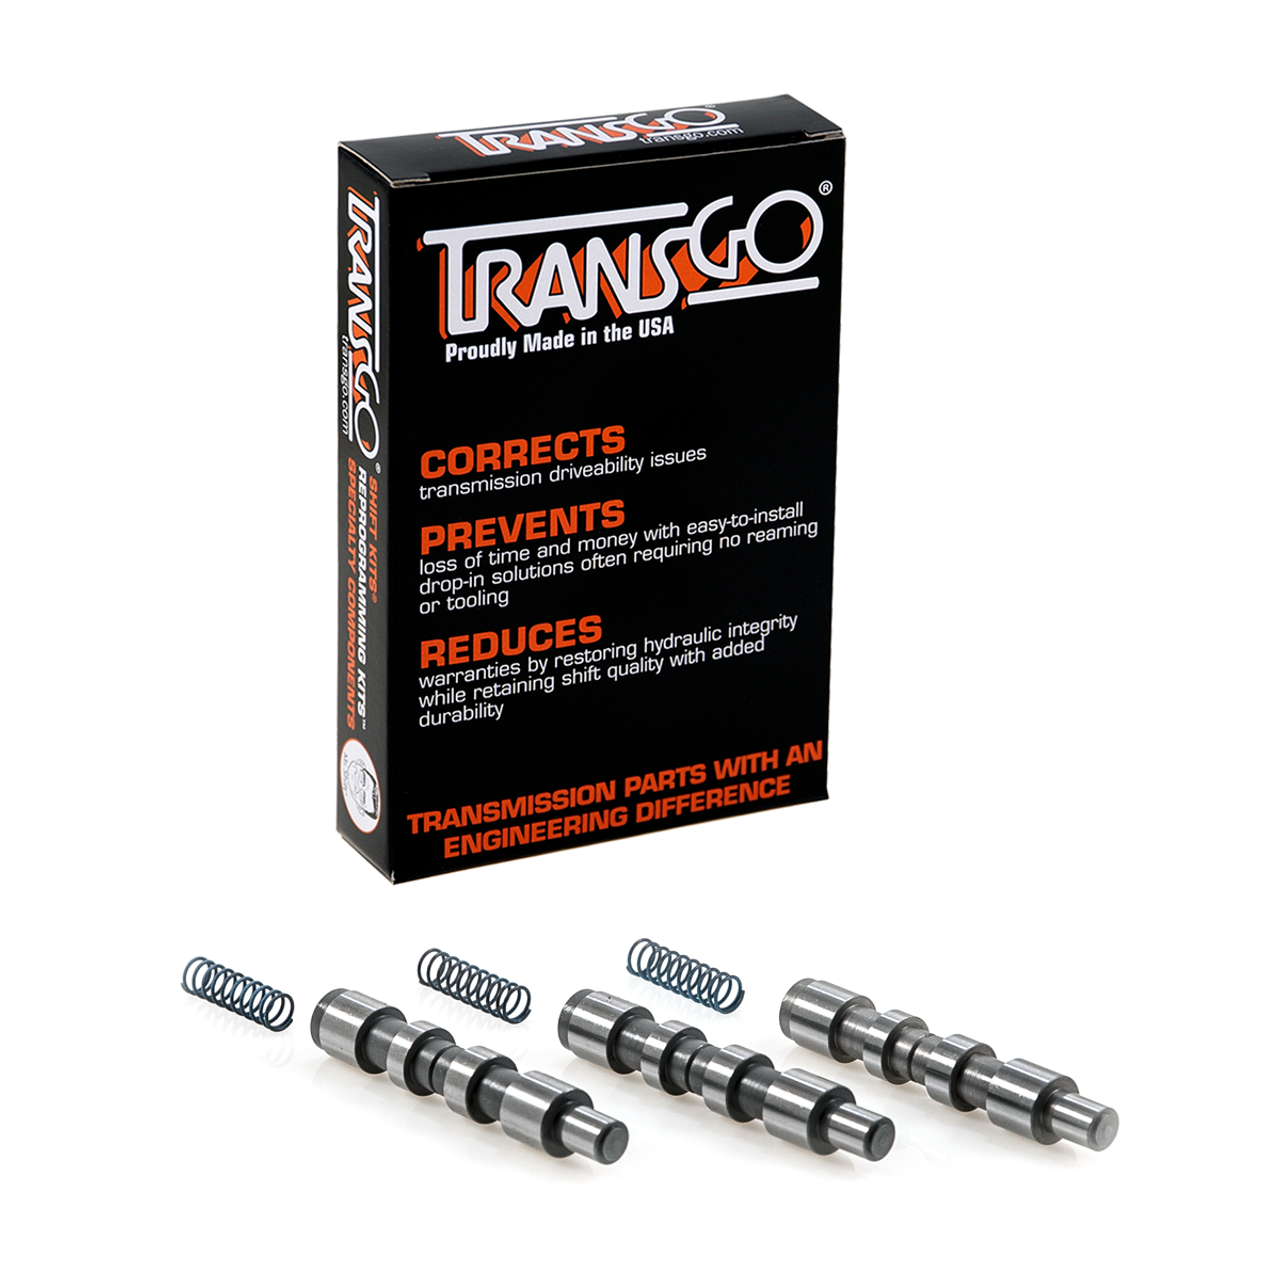 Ford E4OD and 4R100 Transmission HD Shift Valves by TransGo - Sold by Global Transmission Parts